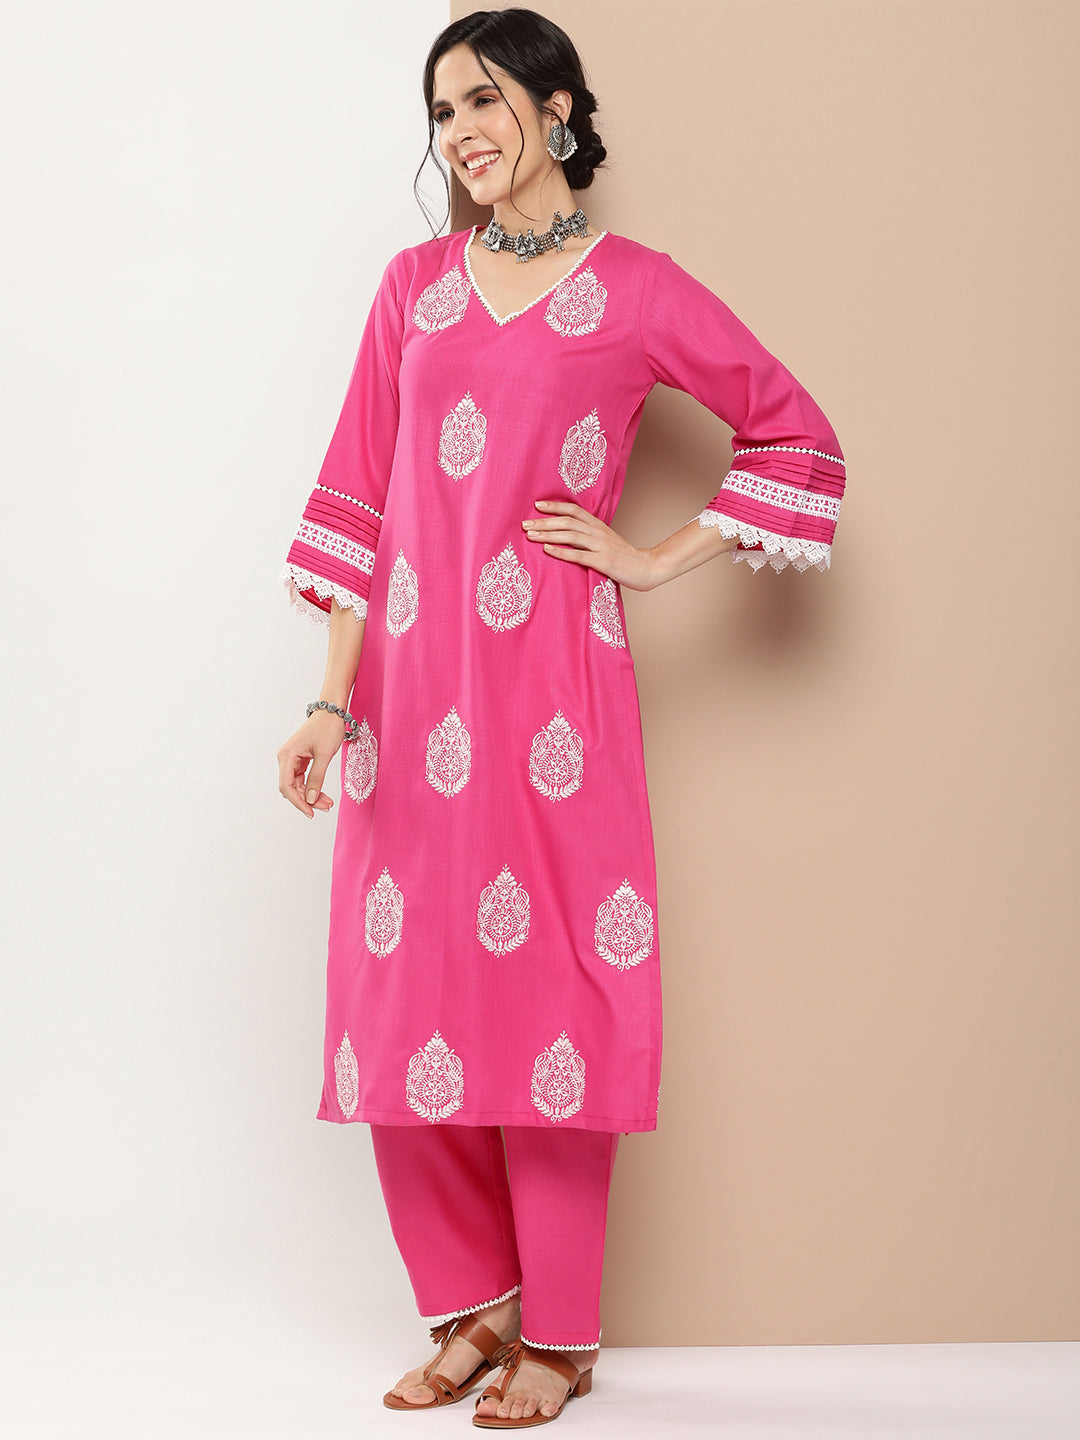 Bhama Couture Pink Embroidered Kurta With Solid Pink Palazzo.